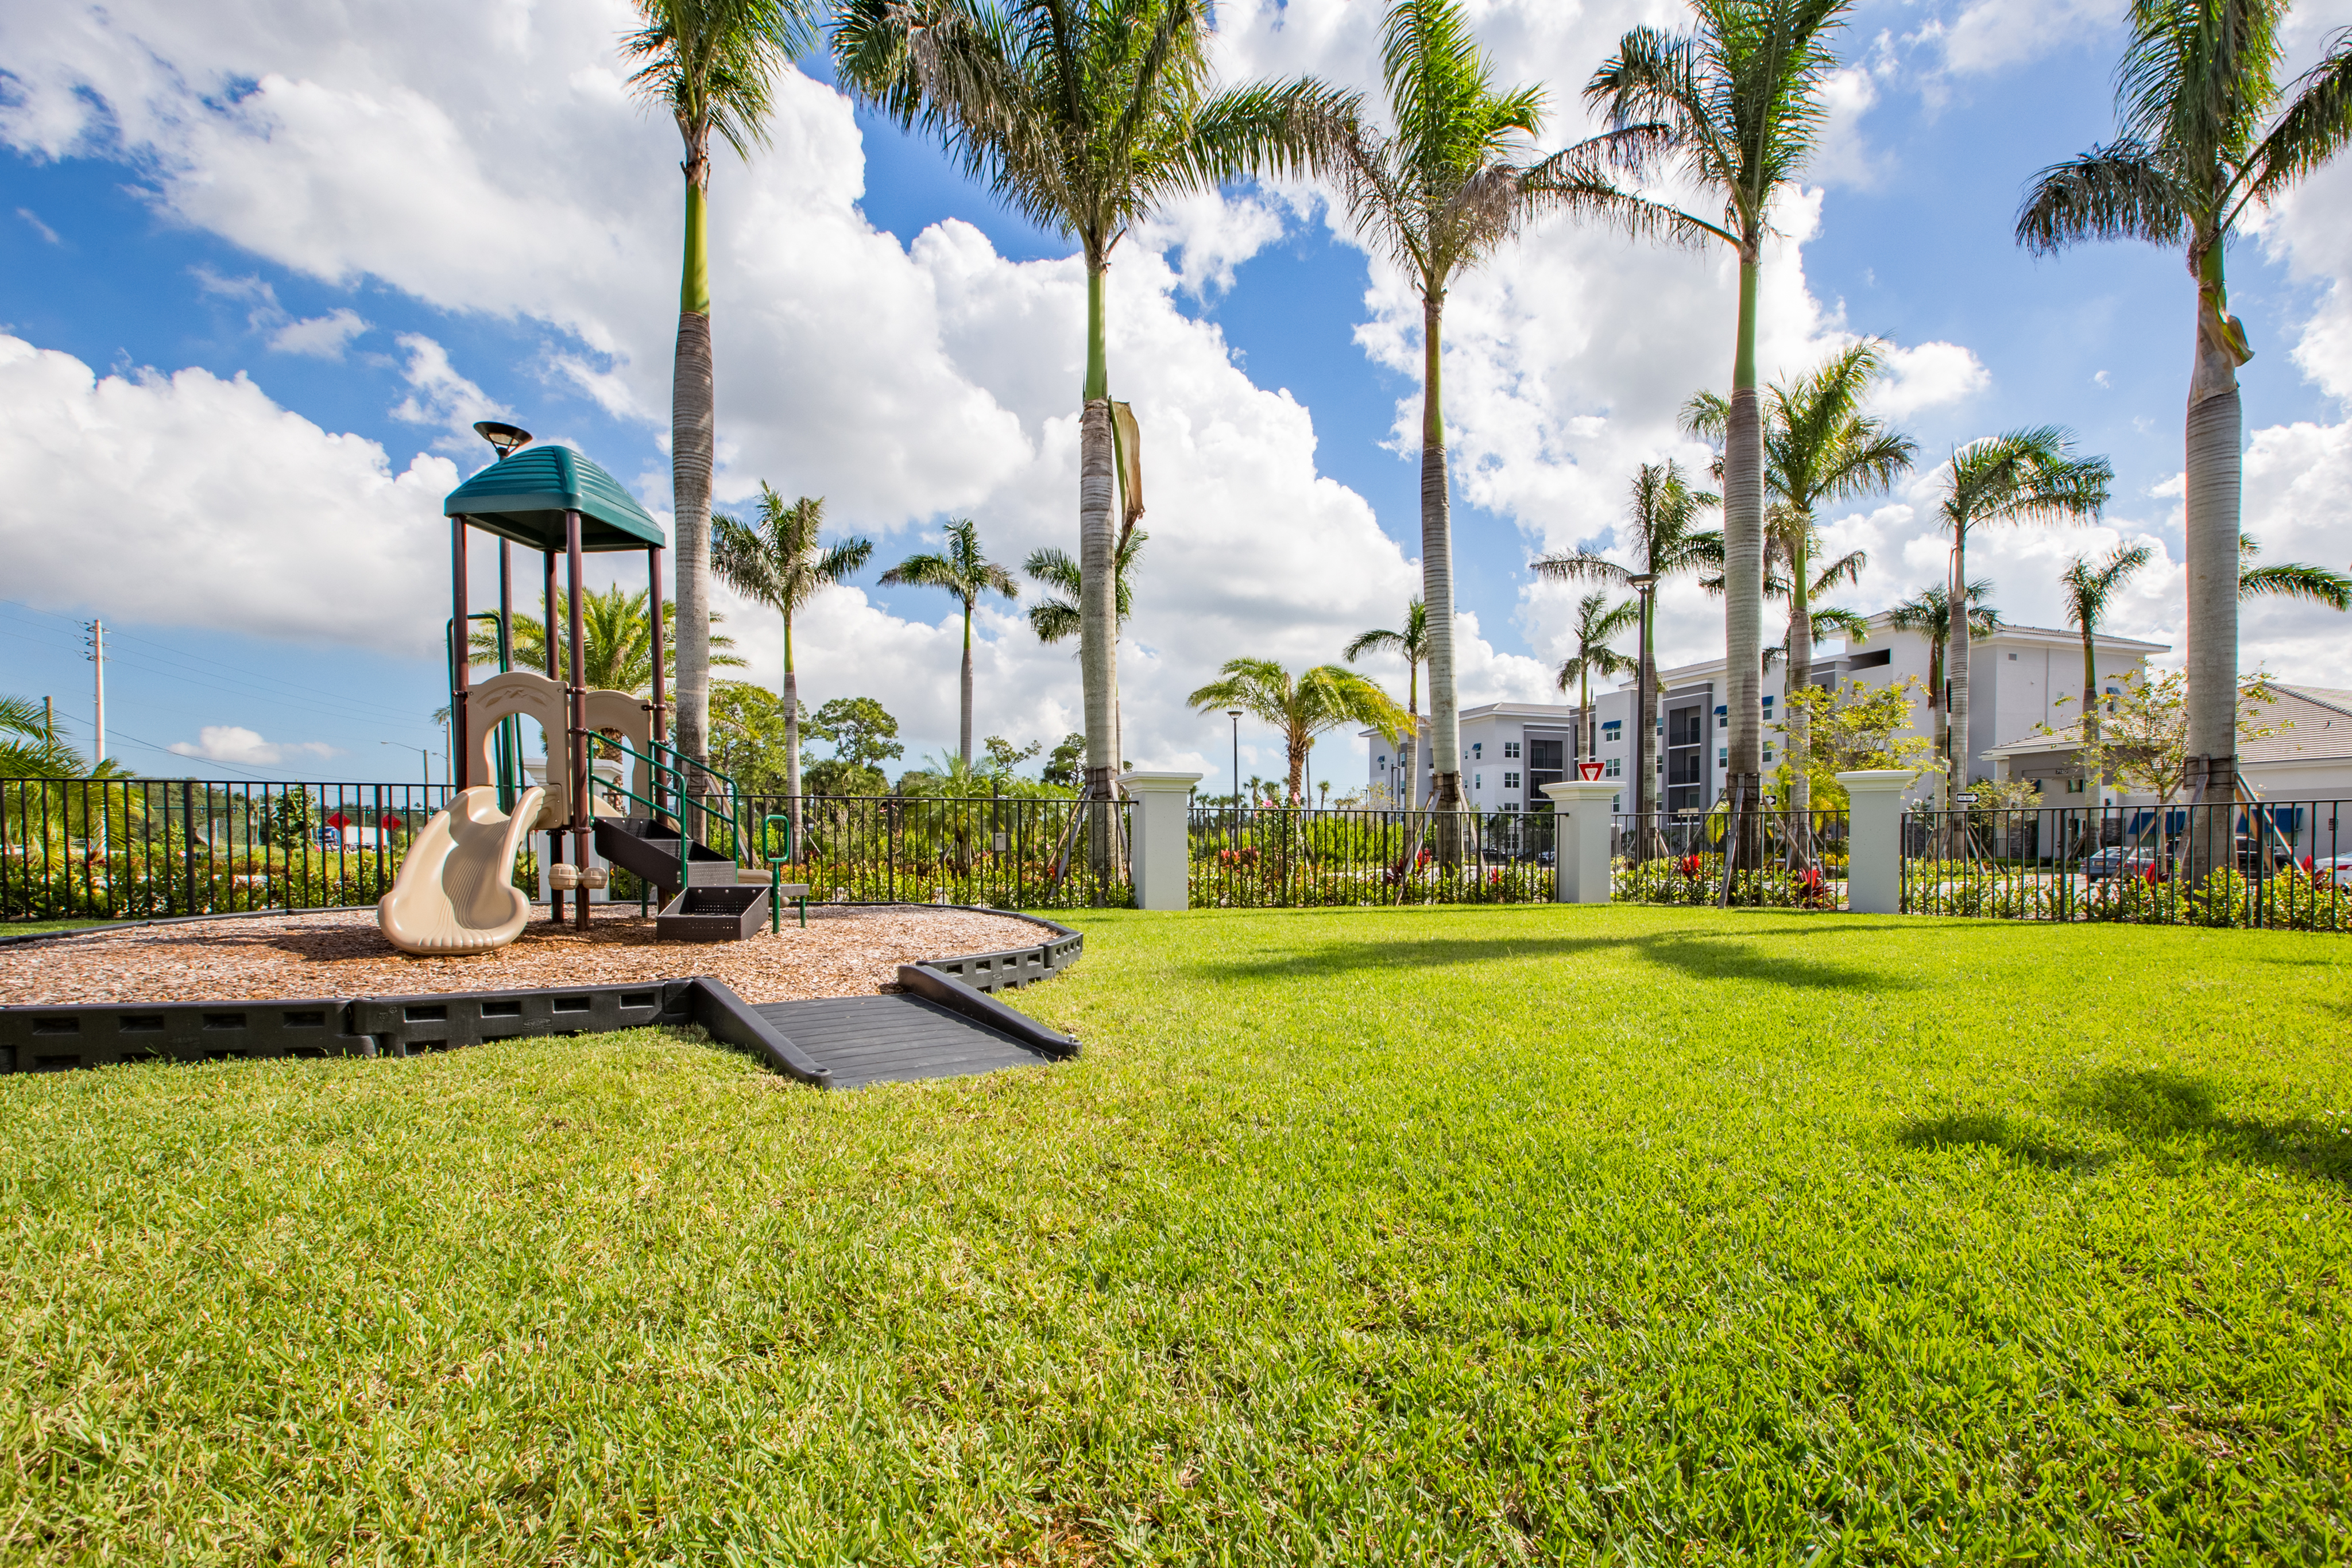 View of Playground, Showing Slide, Climbing Structure, Fenced-In, and Palm Trees in Background at Cottonwood West Palm Apartments